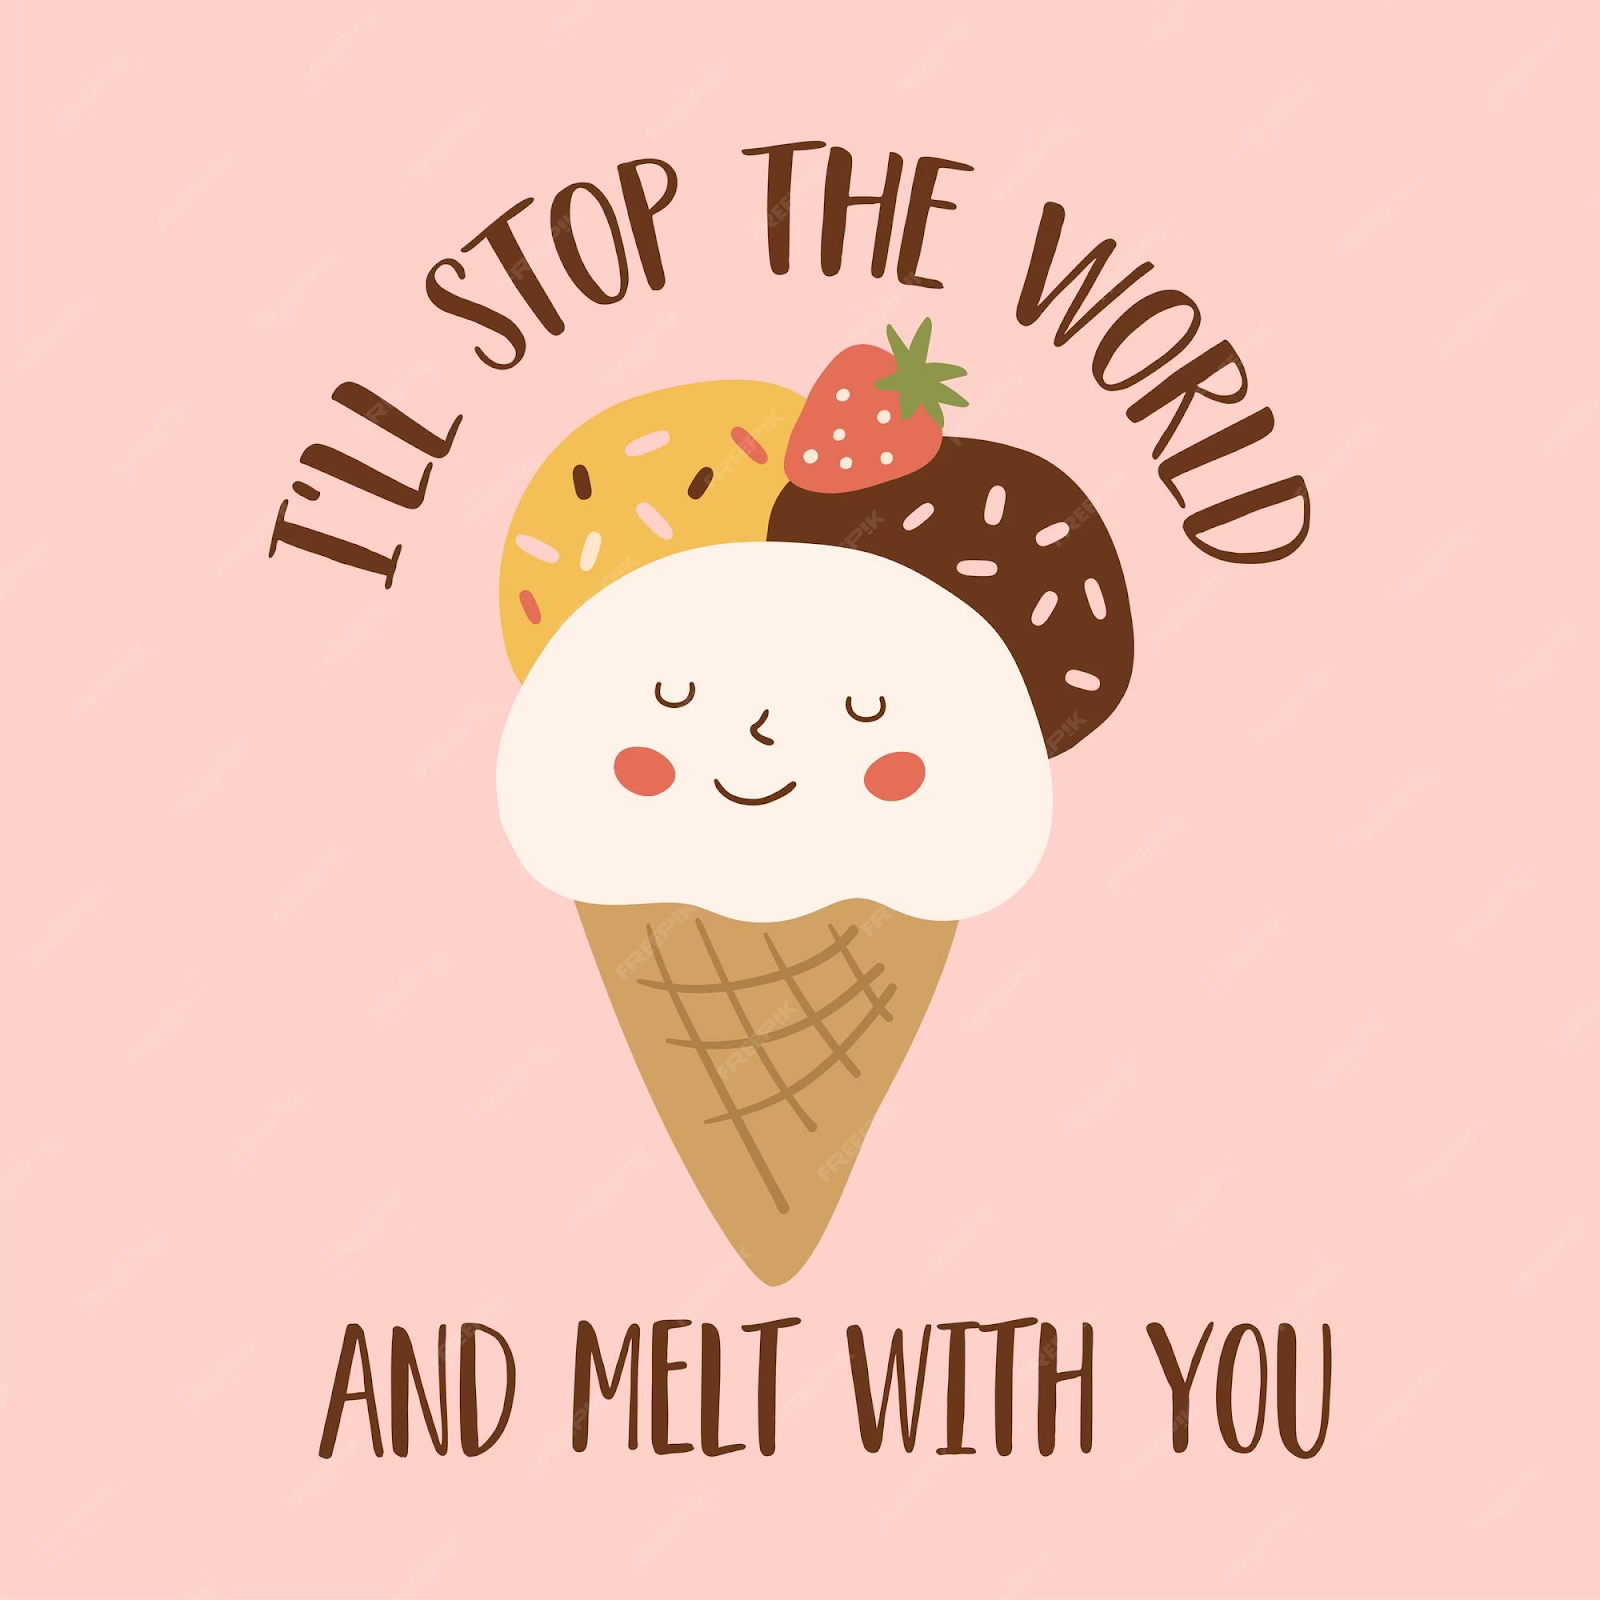 Cute Ice cream One-Liner "I'll Stop the World & Melt With You."